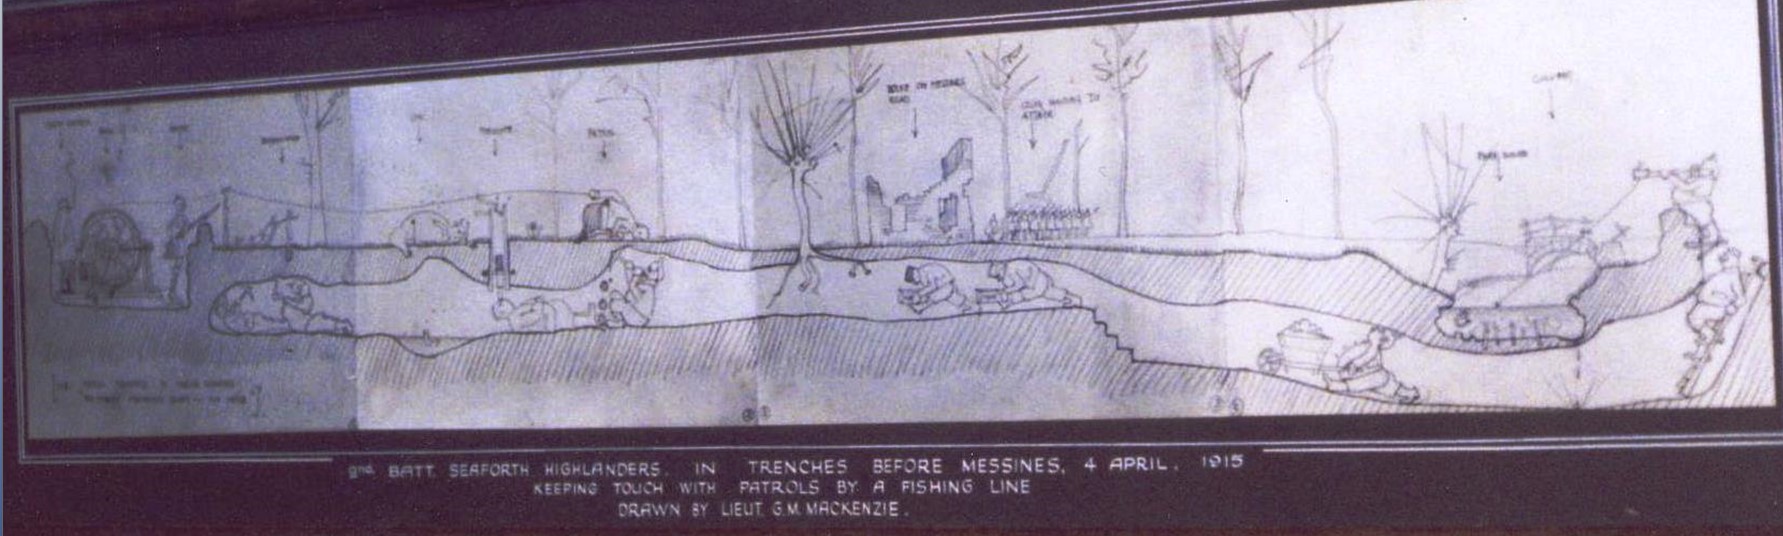 Sketch of the trenches 1915 by Lieut GM Mackenzie of the 2nd Bn Seaforth Highlanders